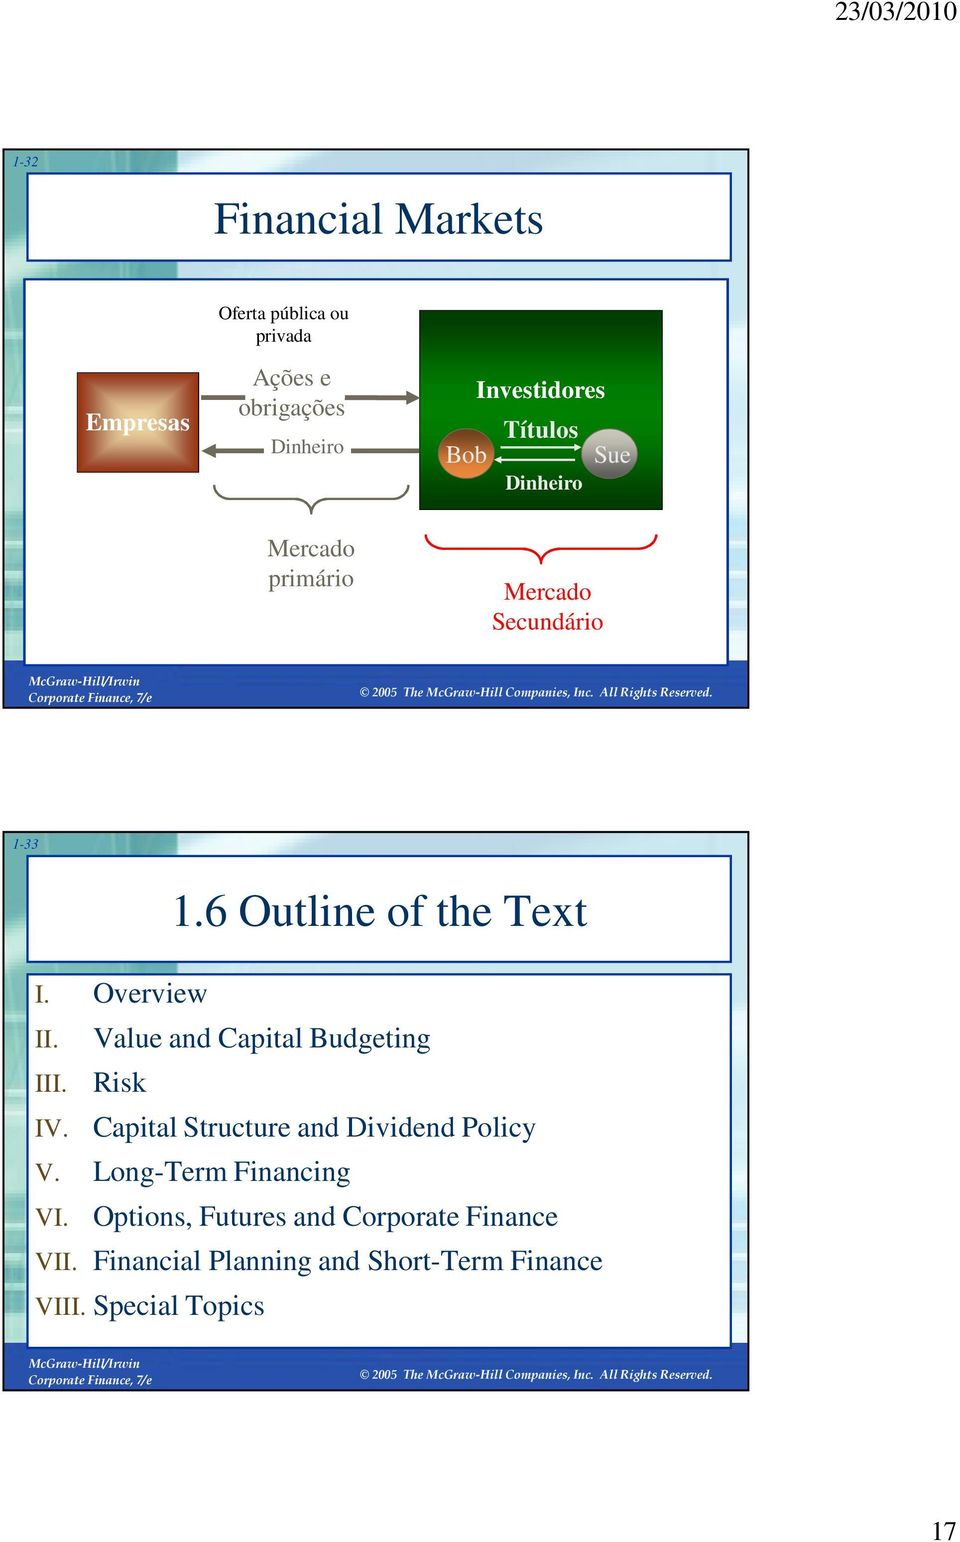 Value and Capital Budgeting III. Risk IV. Capital Structure and Dividend Policy V. Long-Term Financing VI.